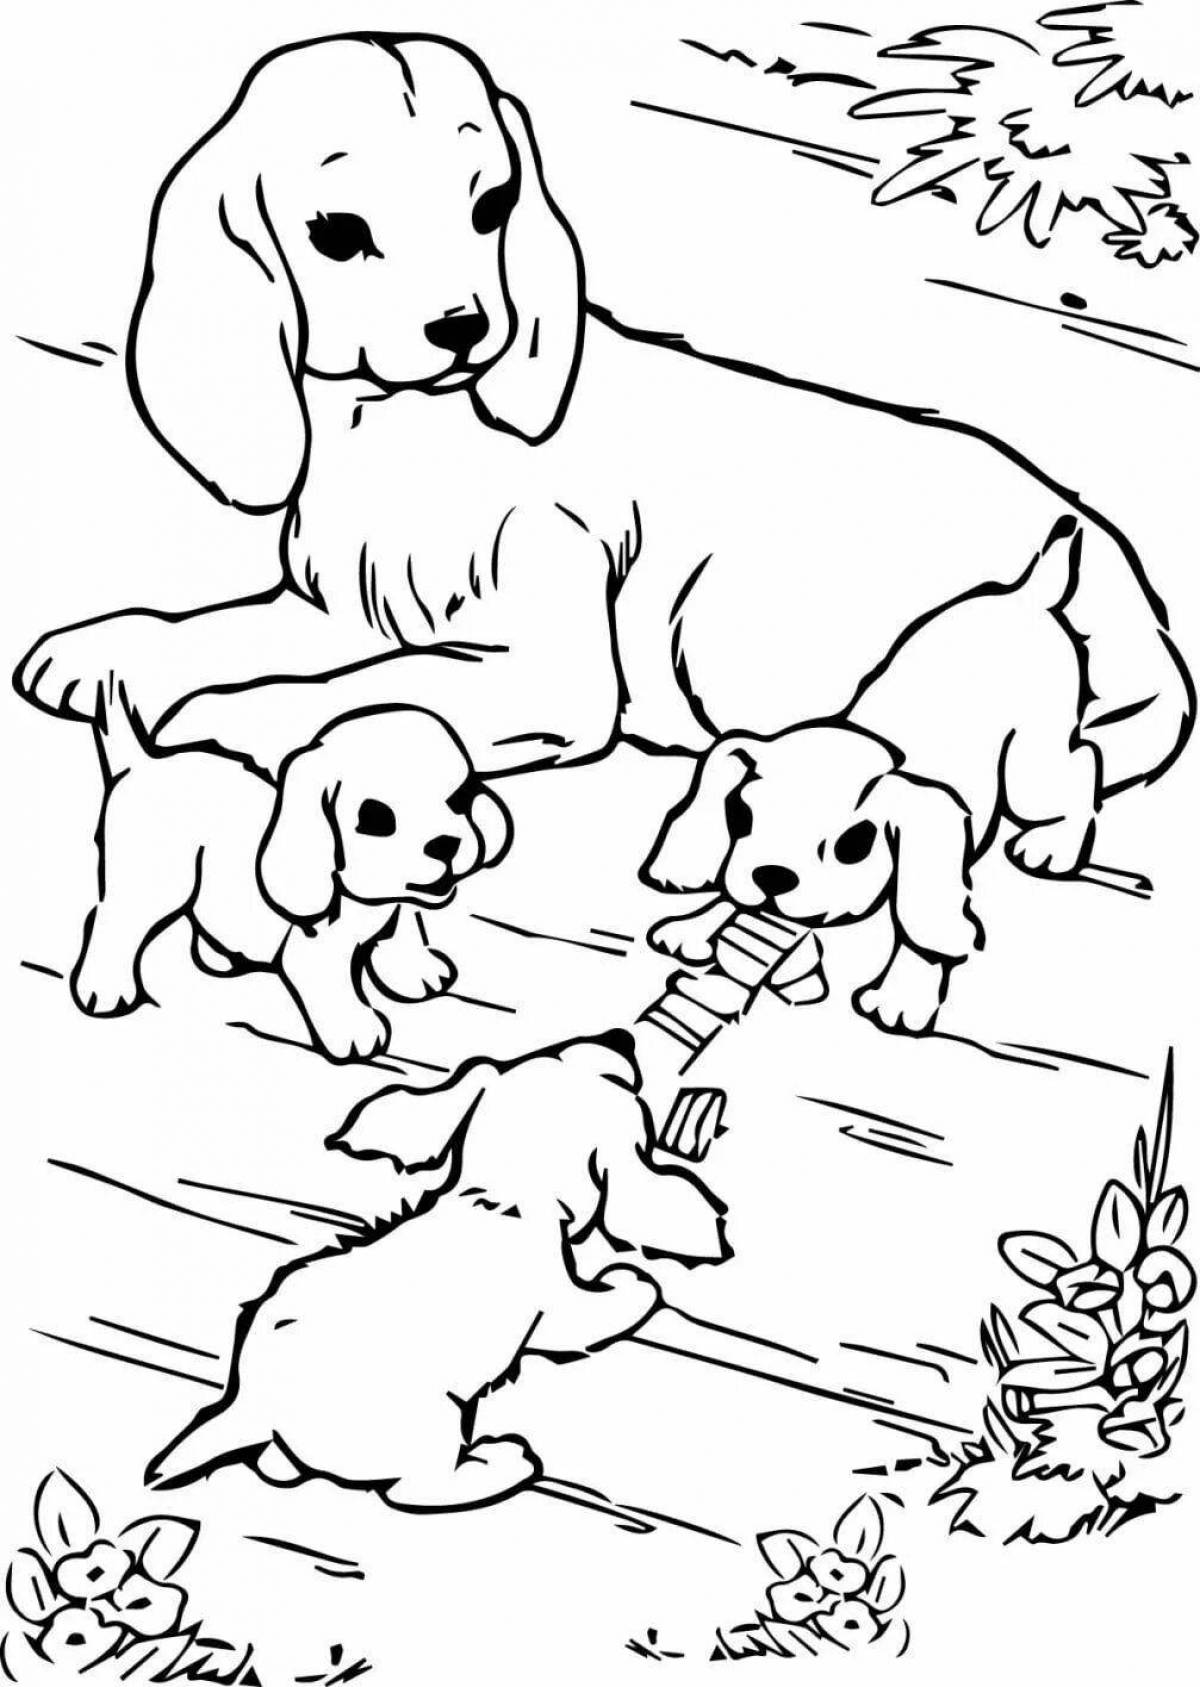 Playful domestic dog coloring book